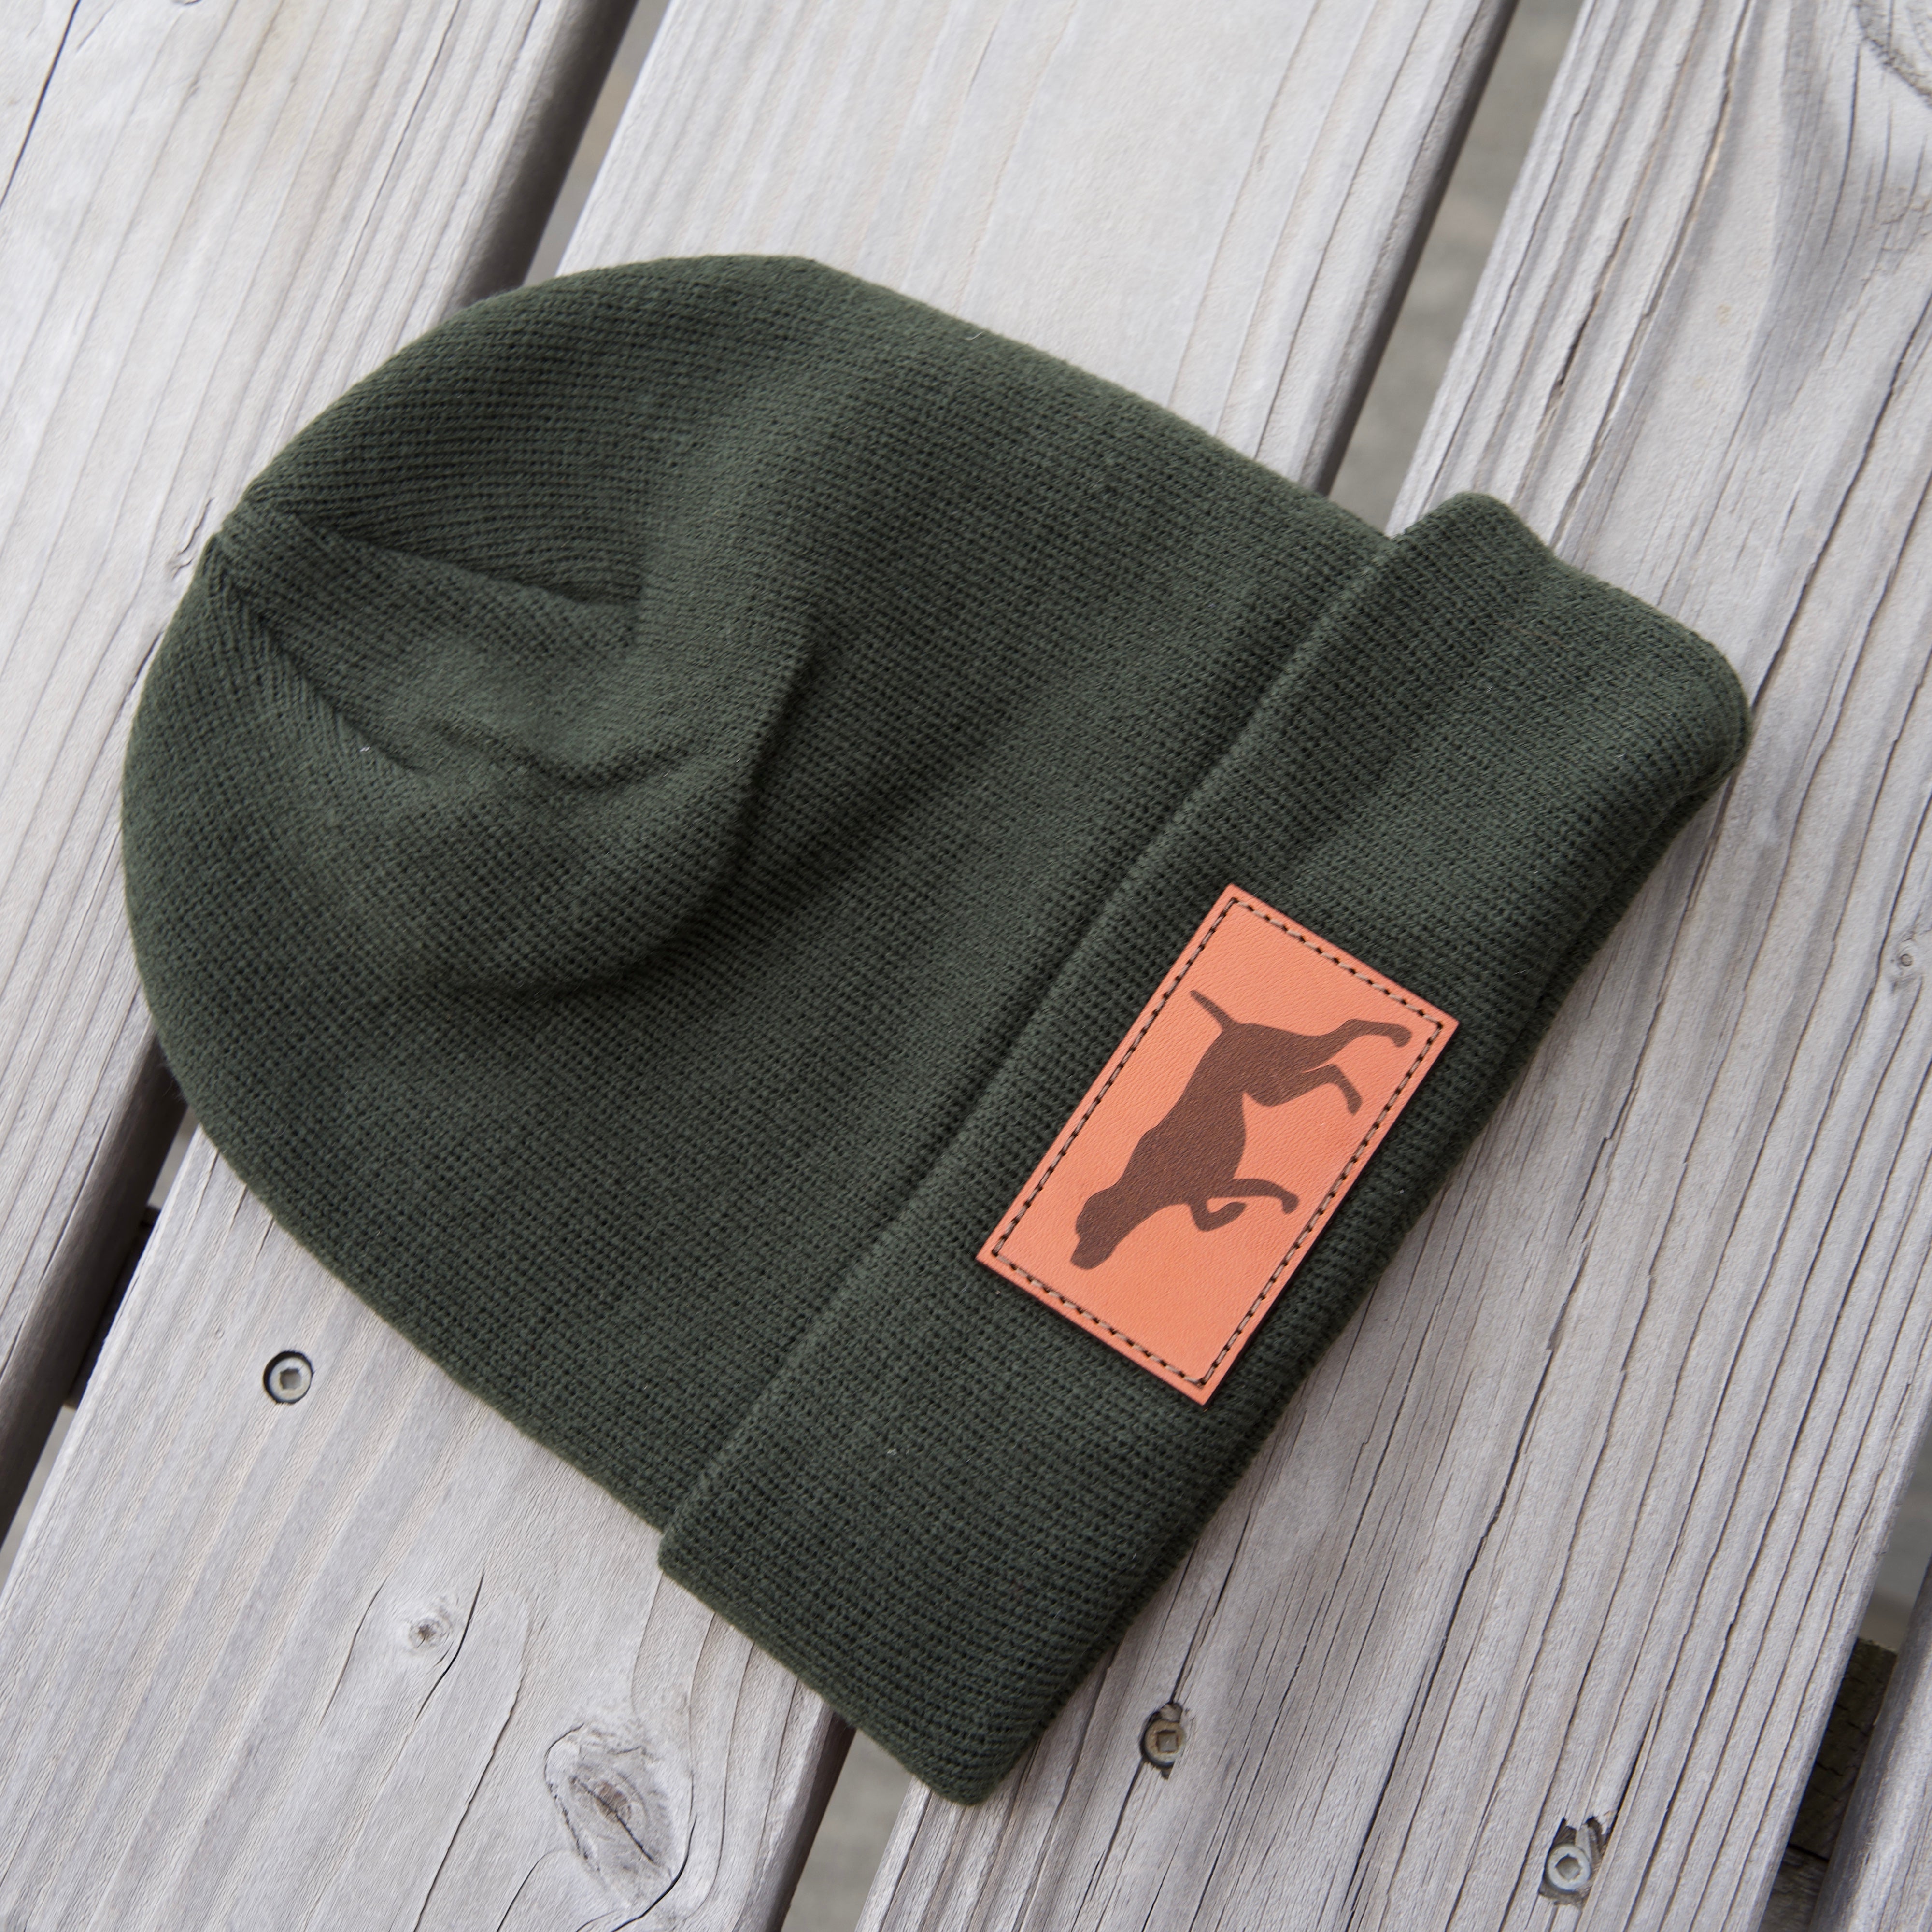 Tails Up Beanie